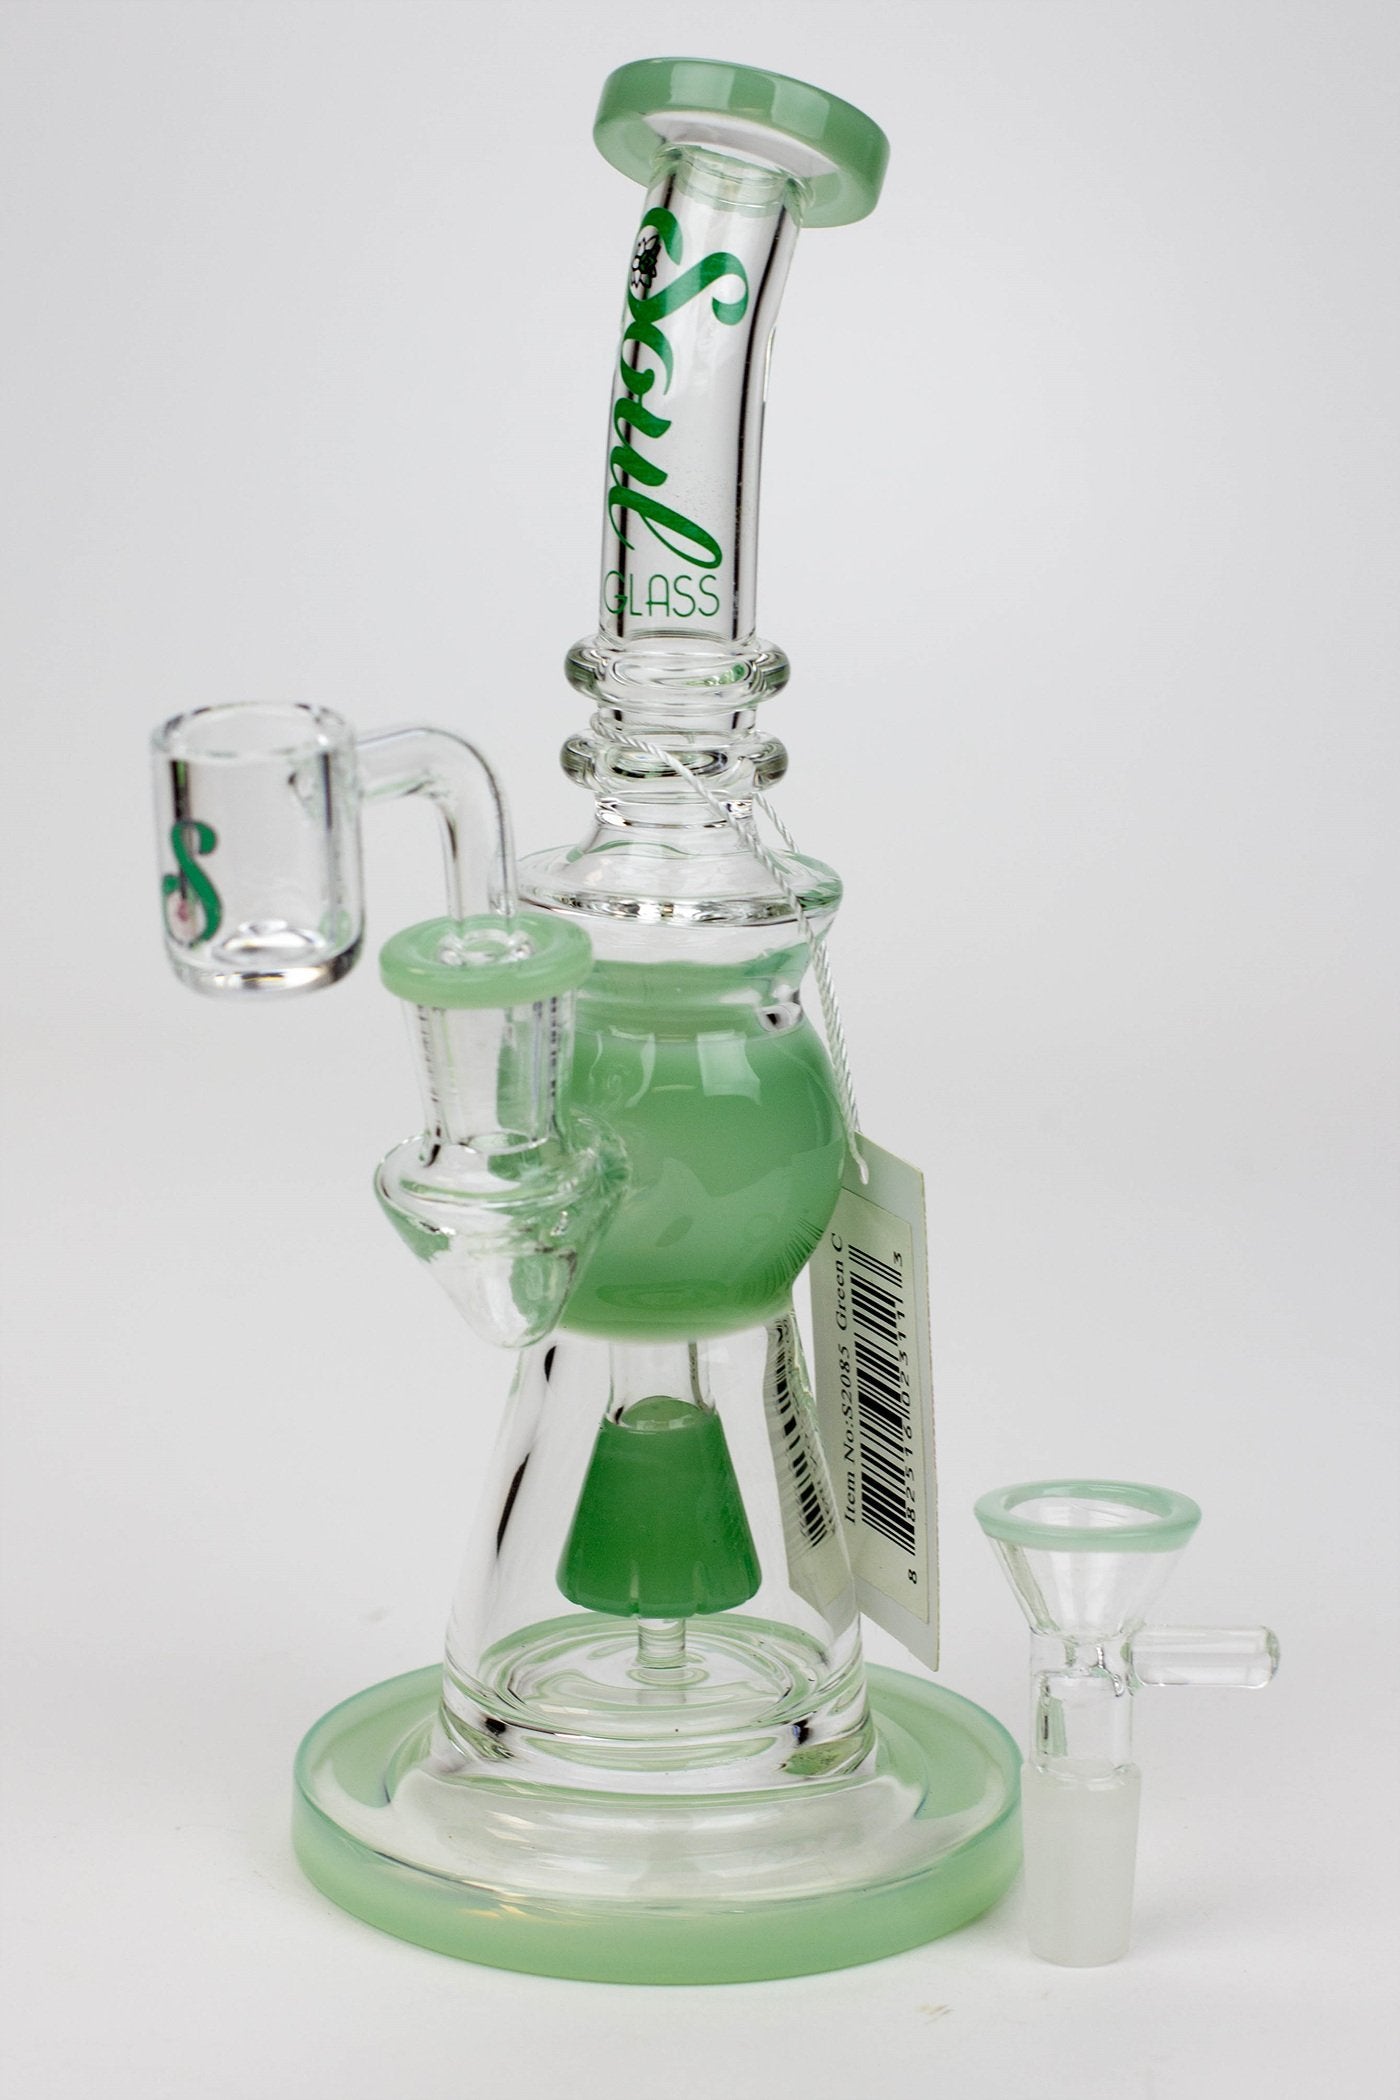 8.2" SOUL Glass 2-in-1 Cone diffuser glass bong Flower Power Packages Jade 